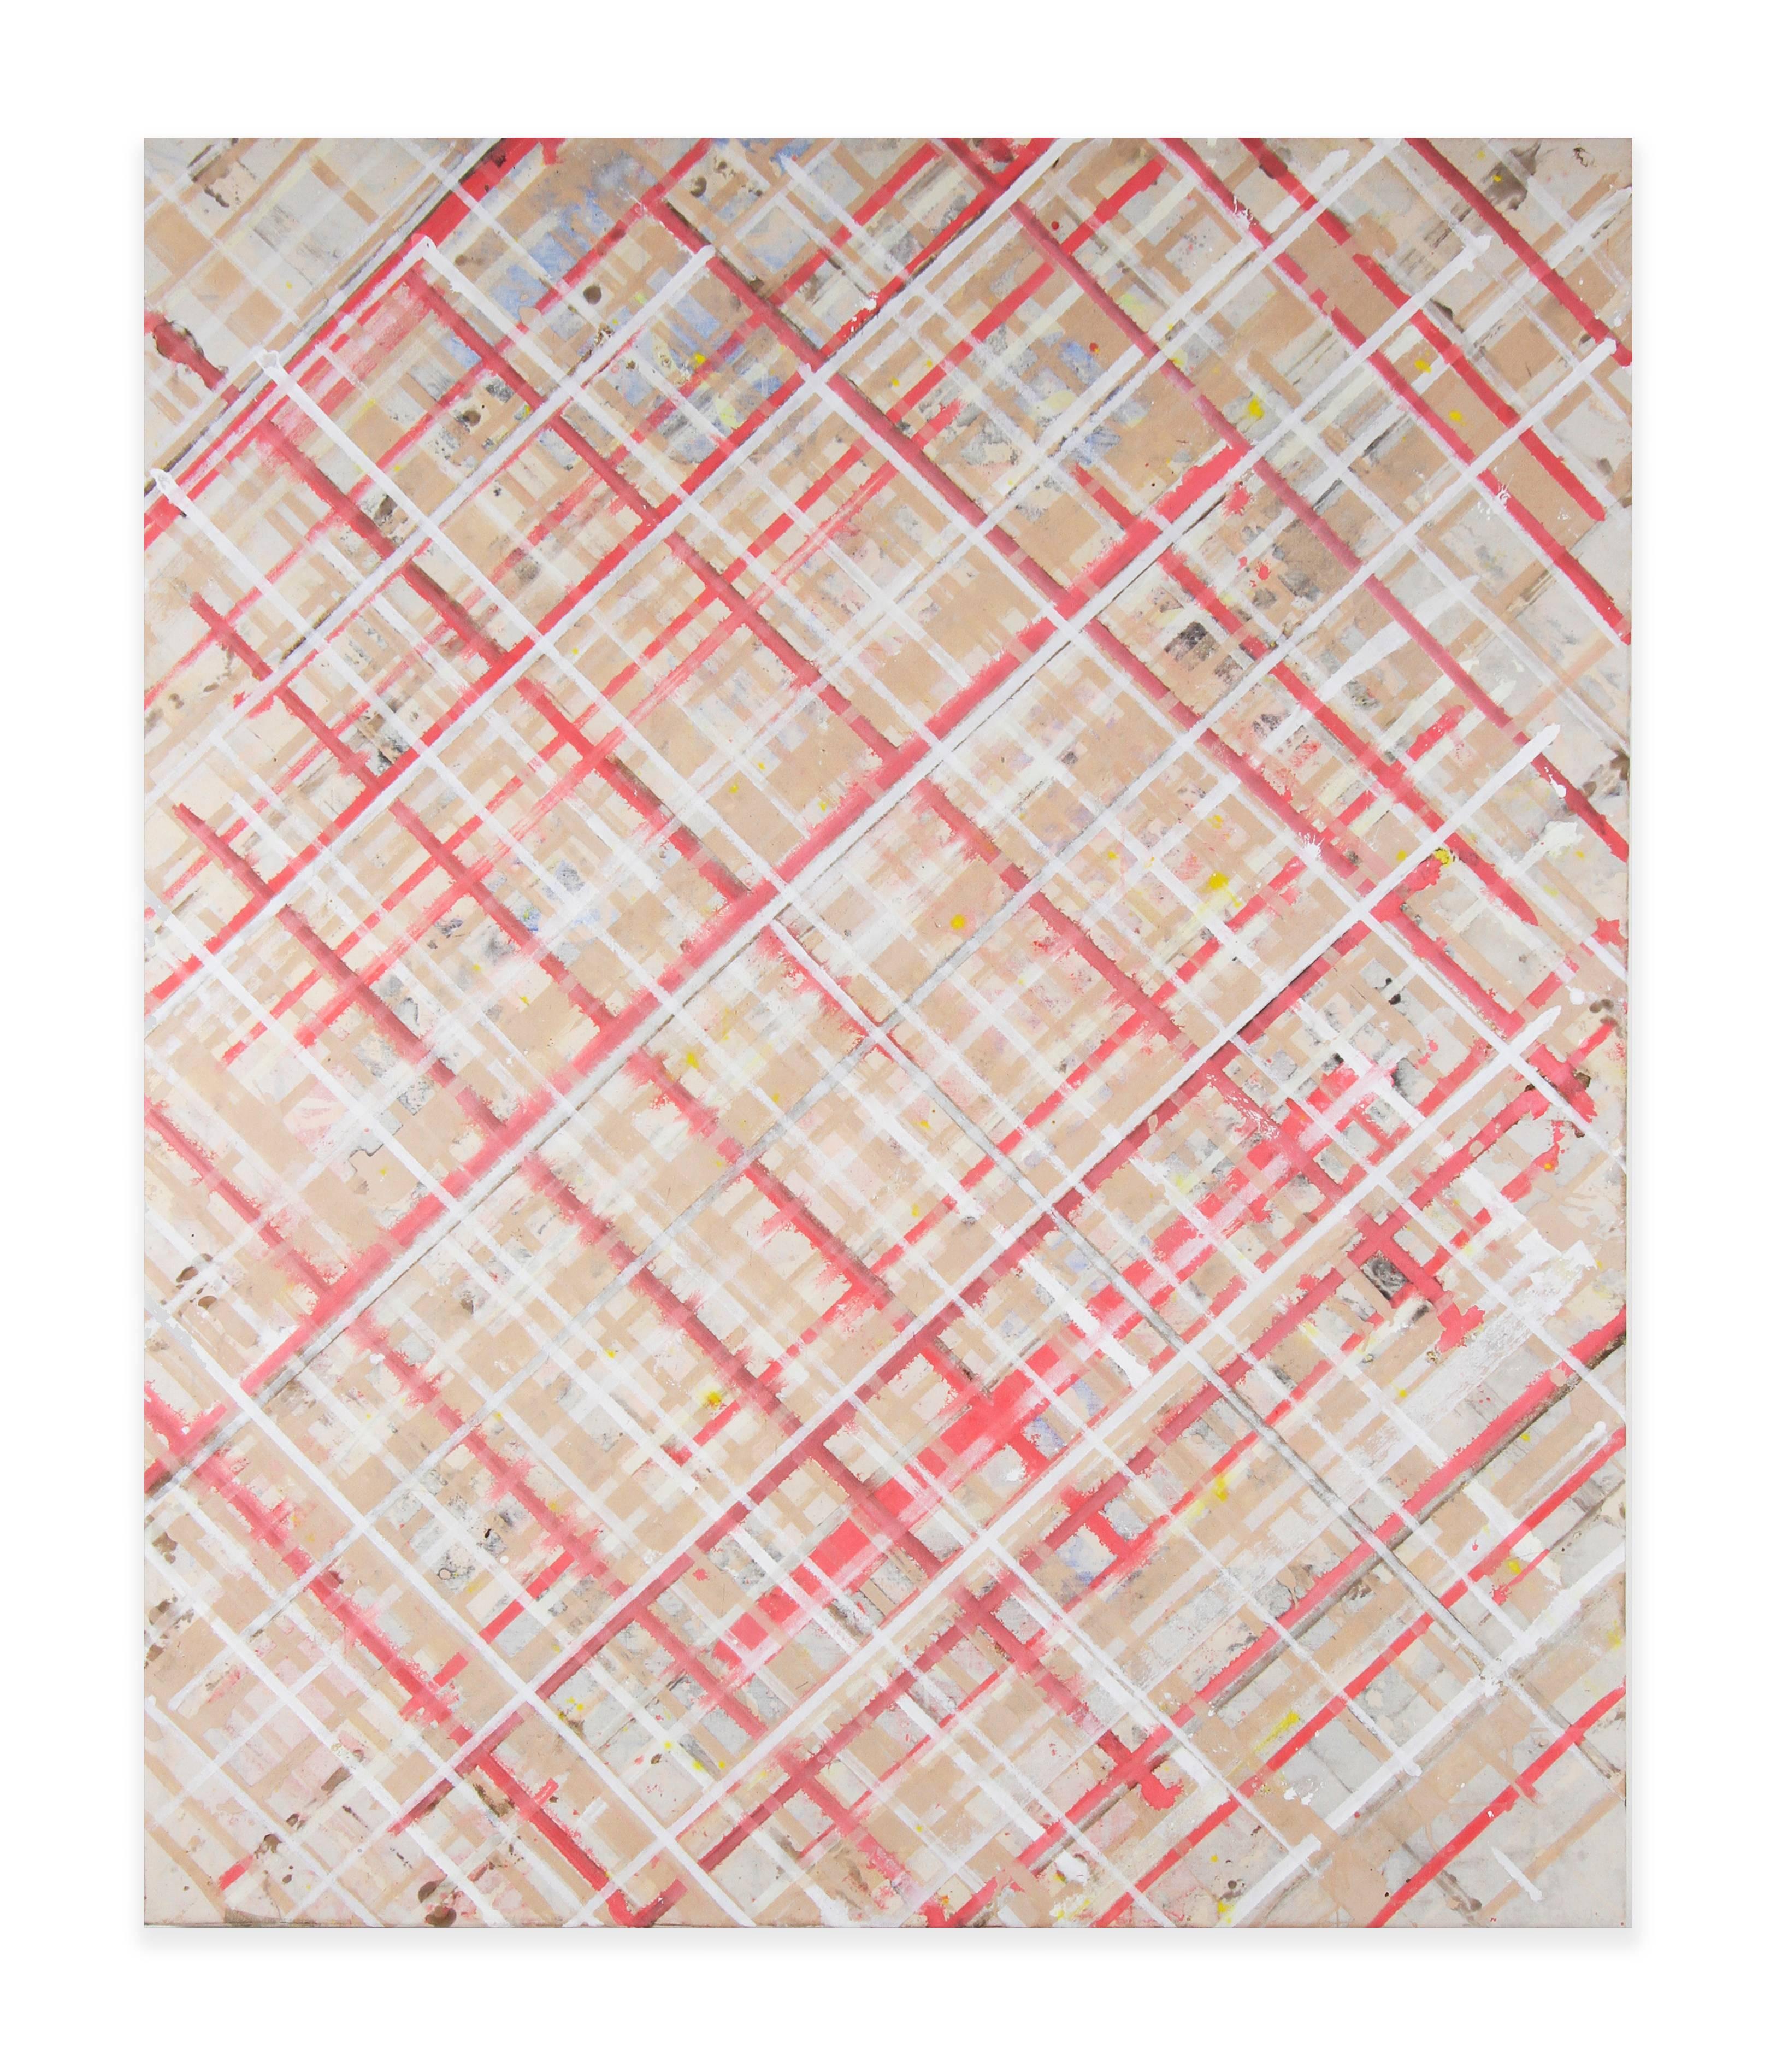 Pink Grid #1 - Painting by Ed Moses